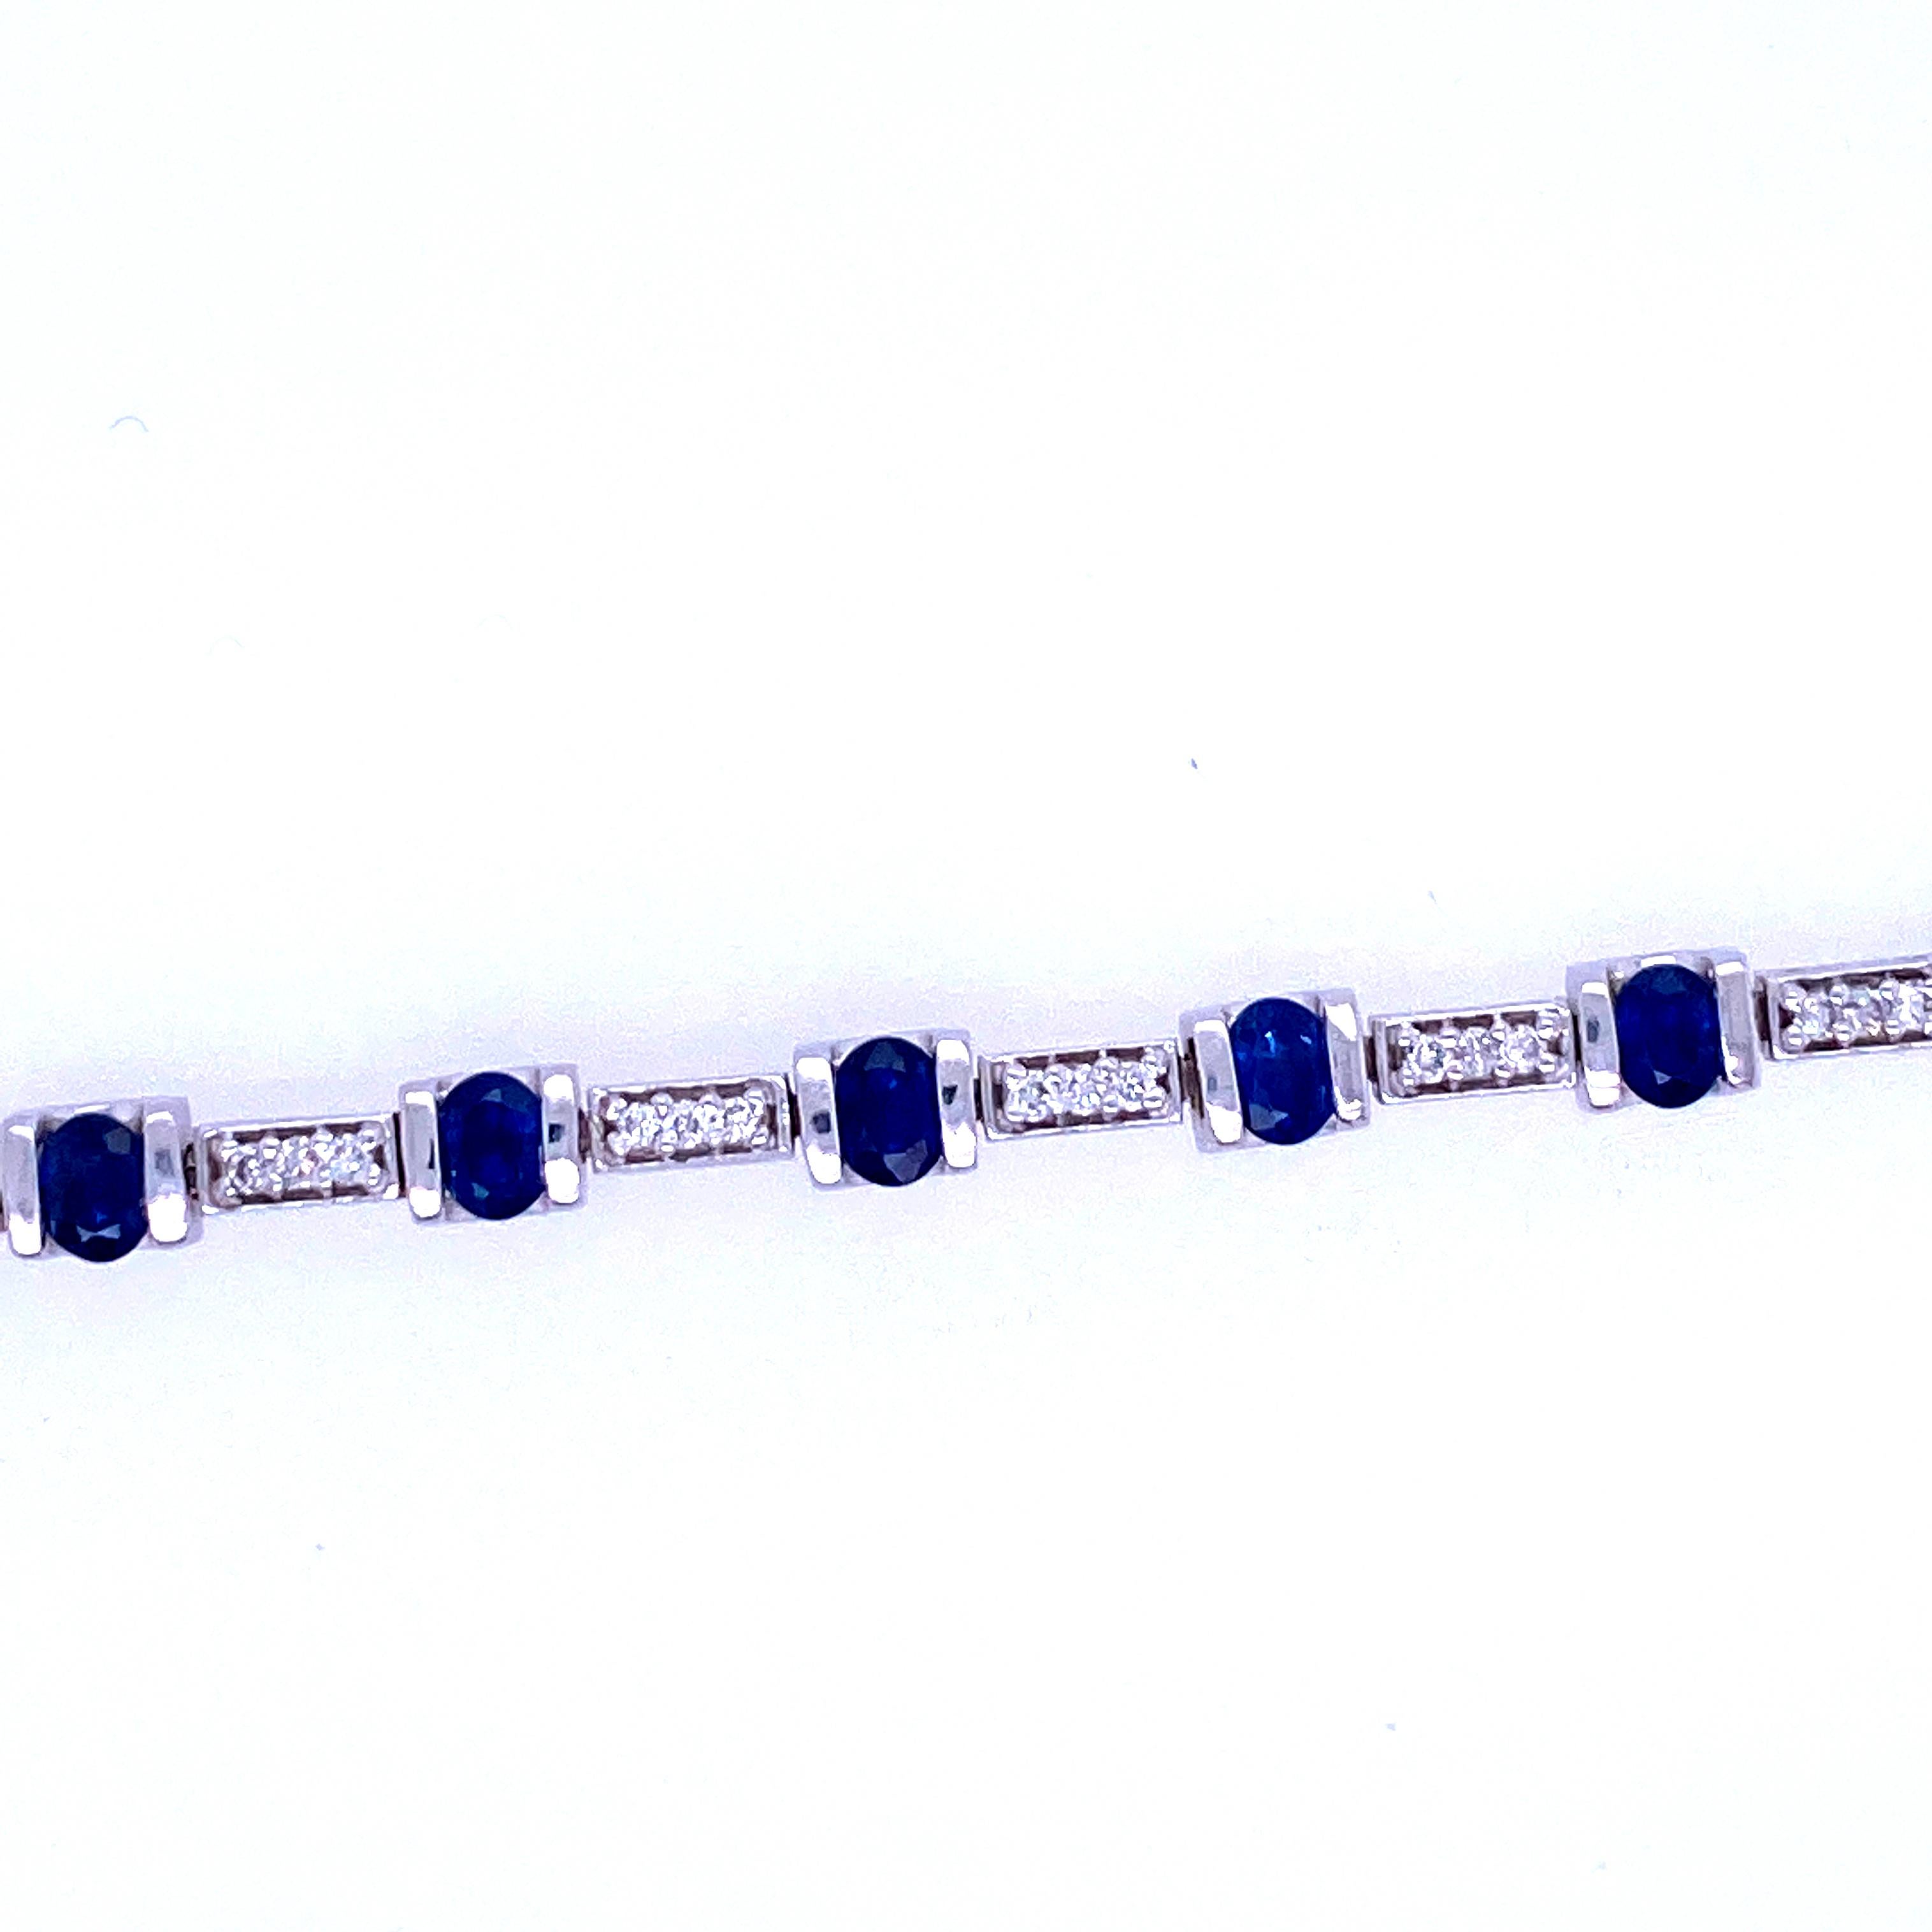 One 14 karat white gold (stamped BH 14K) sapphire and diamond bracelet bar set with 16 oval sapphires. 4x3 mm each, separated by 16 links, each bead set with three 1.5mm round brilliant diamonds, approximately 0.75 carats total weight with matching